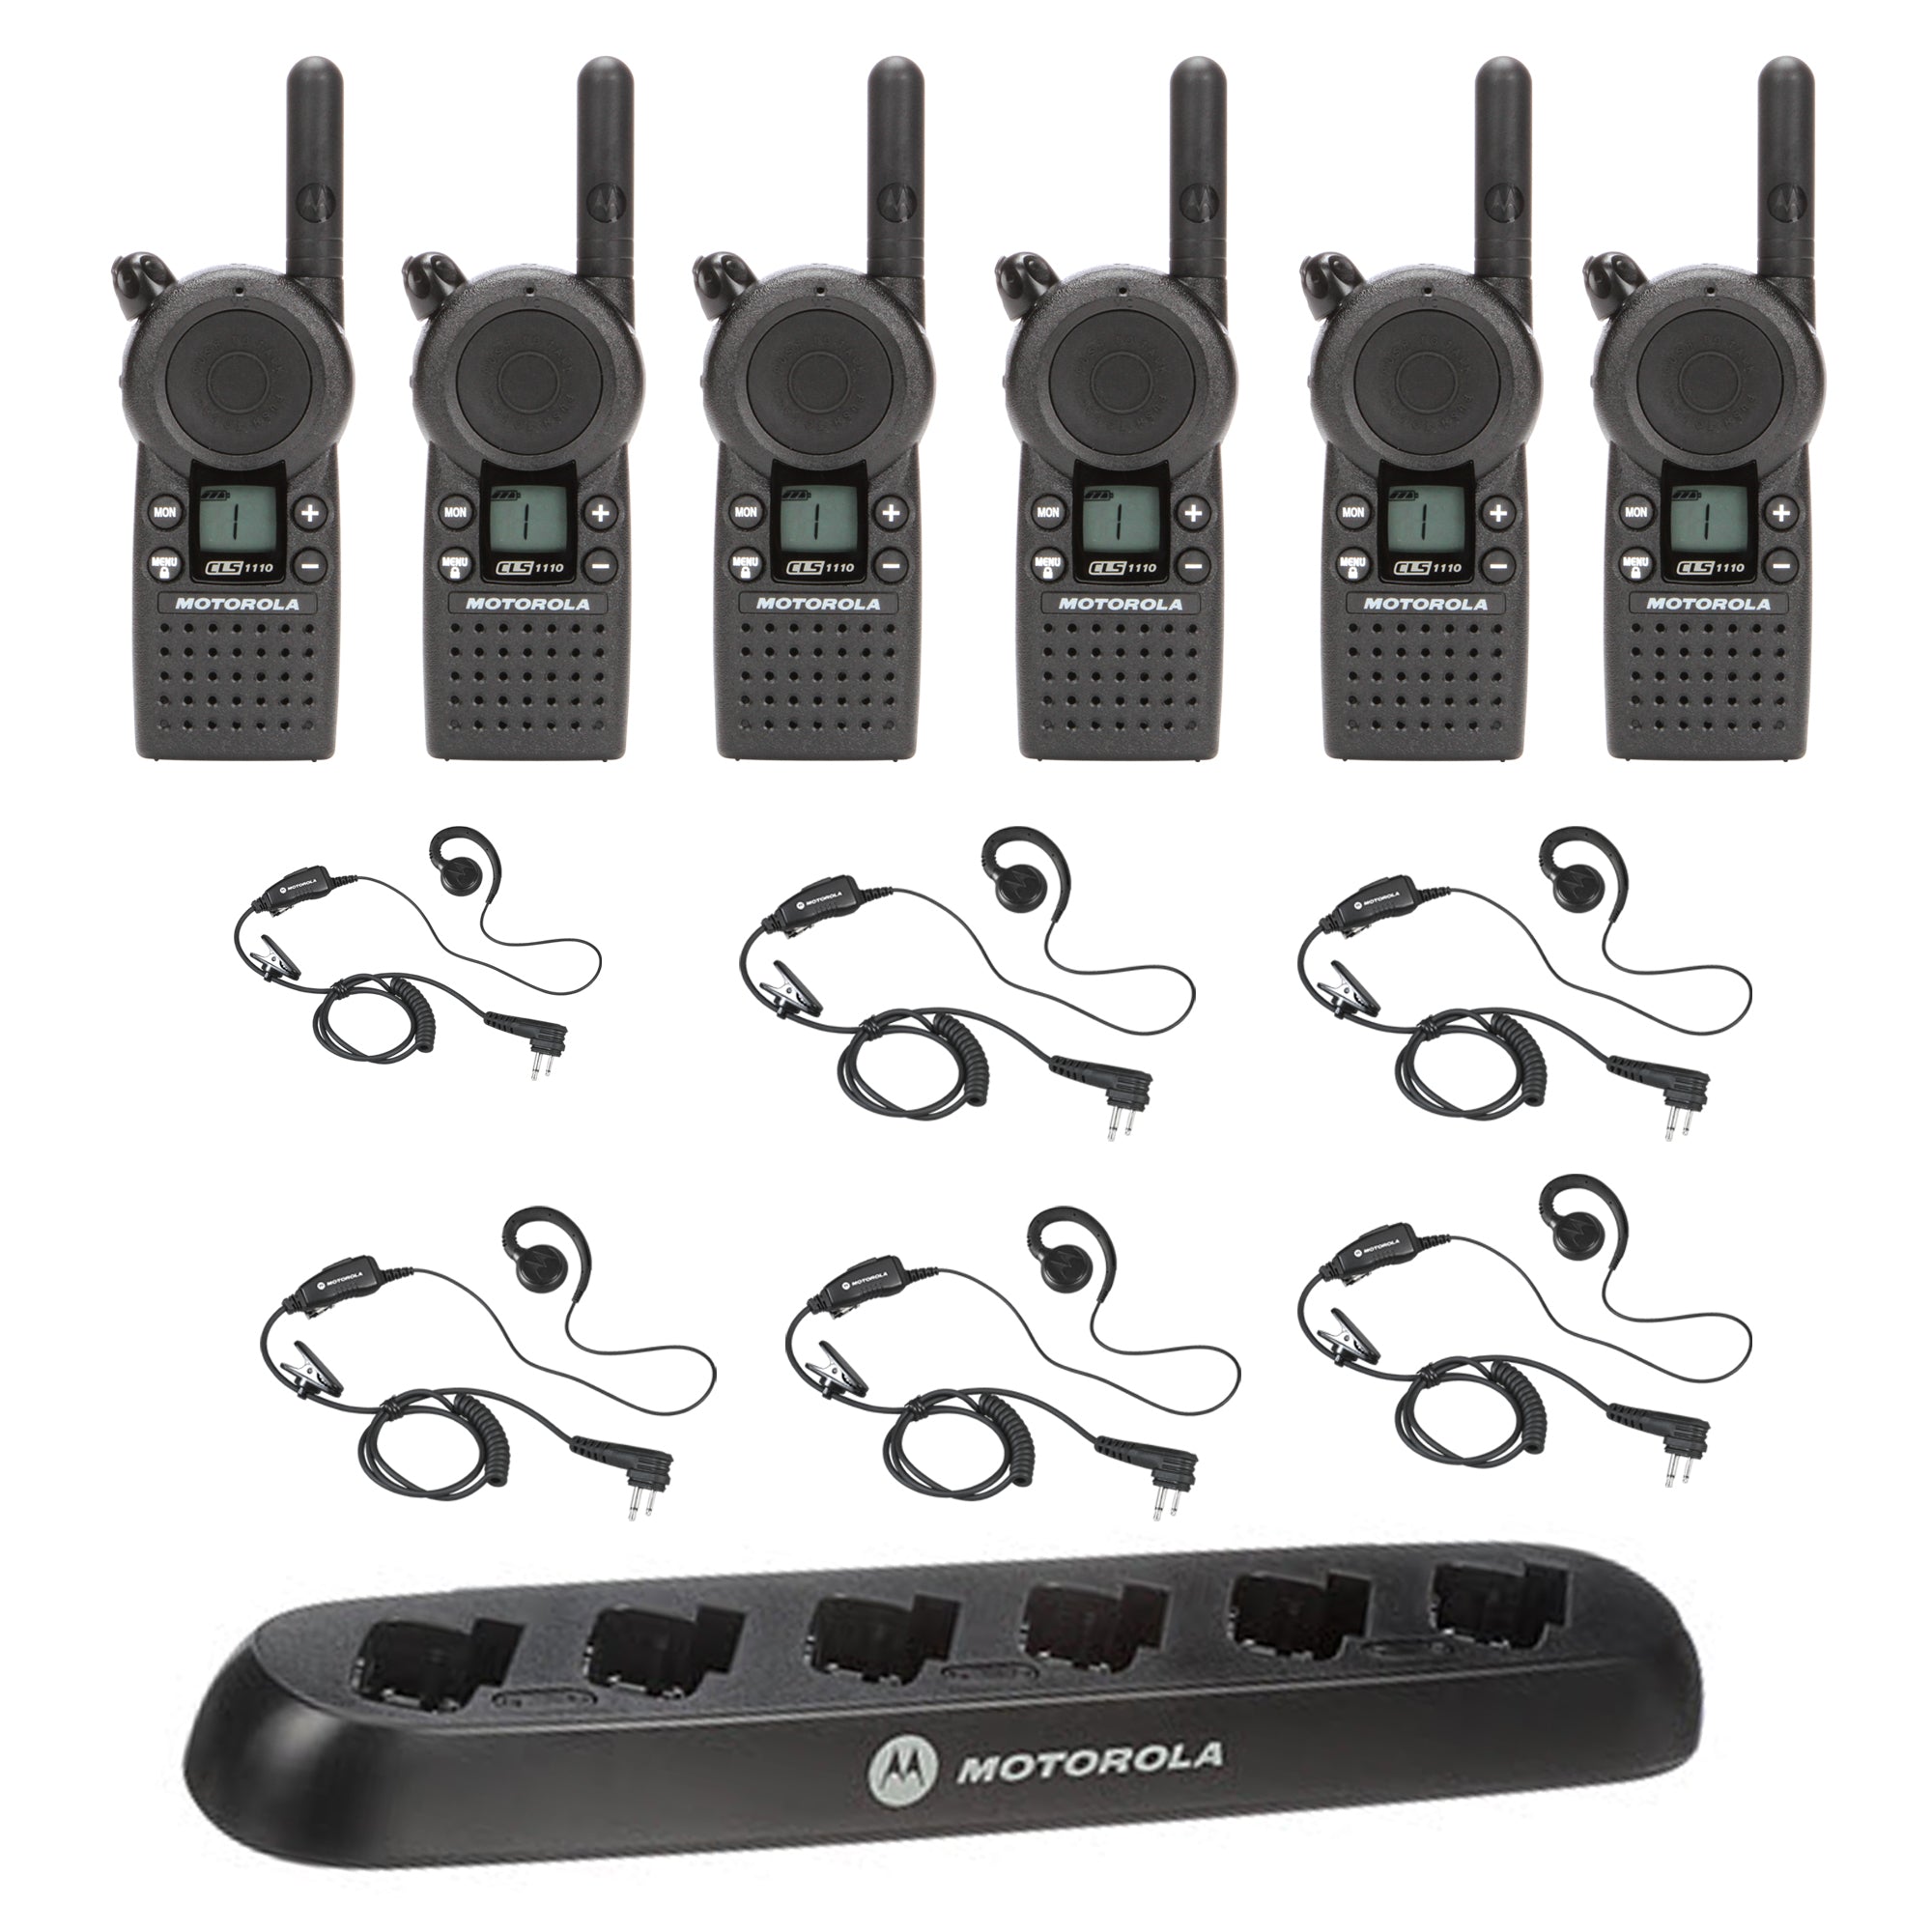 CLS1110 6 Pack Bundle with Multi Charger and Headsets